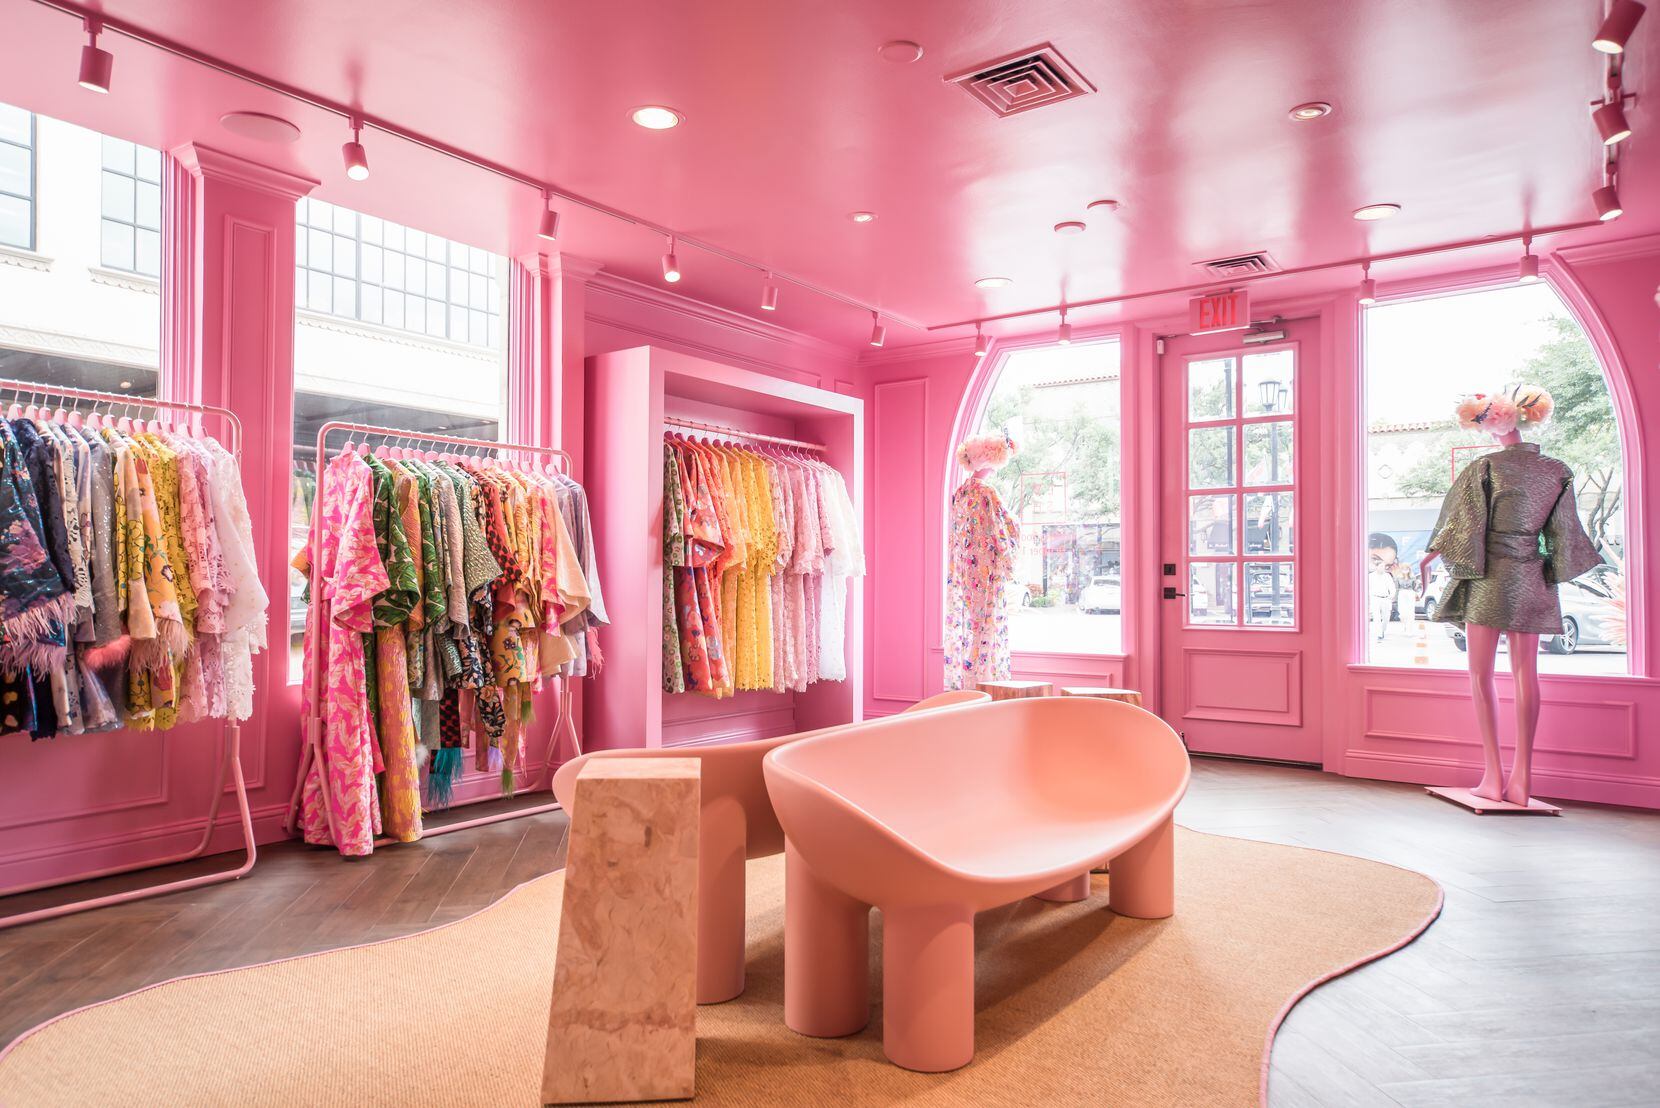 La Vie Style House in Highland Park Village opened in October 2020 during the pandemic. Founders Jamie Coulter and Lindsey McClain have reimagined classic caftan and kimono silhouettes from vintage and designer fabrics into one-size pieces. The garments are made in Dallas.